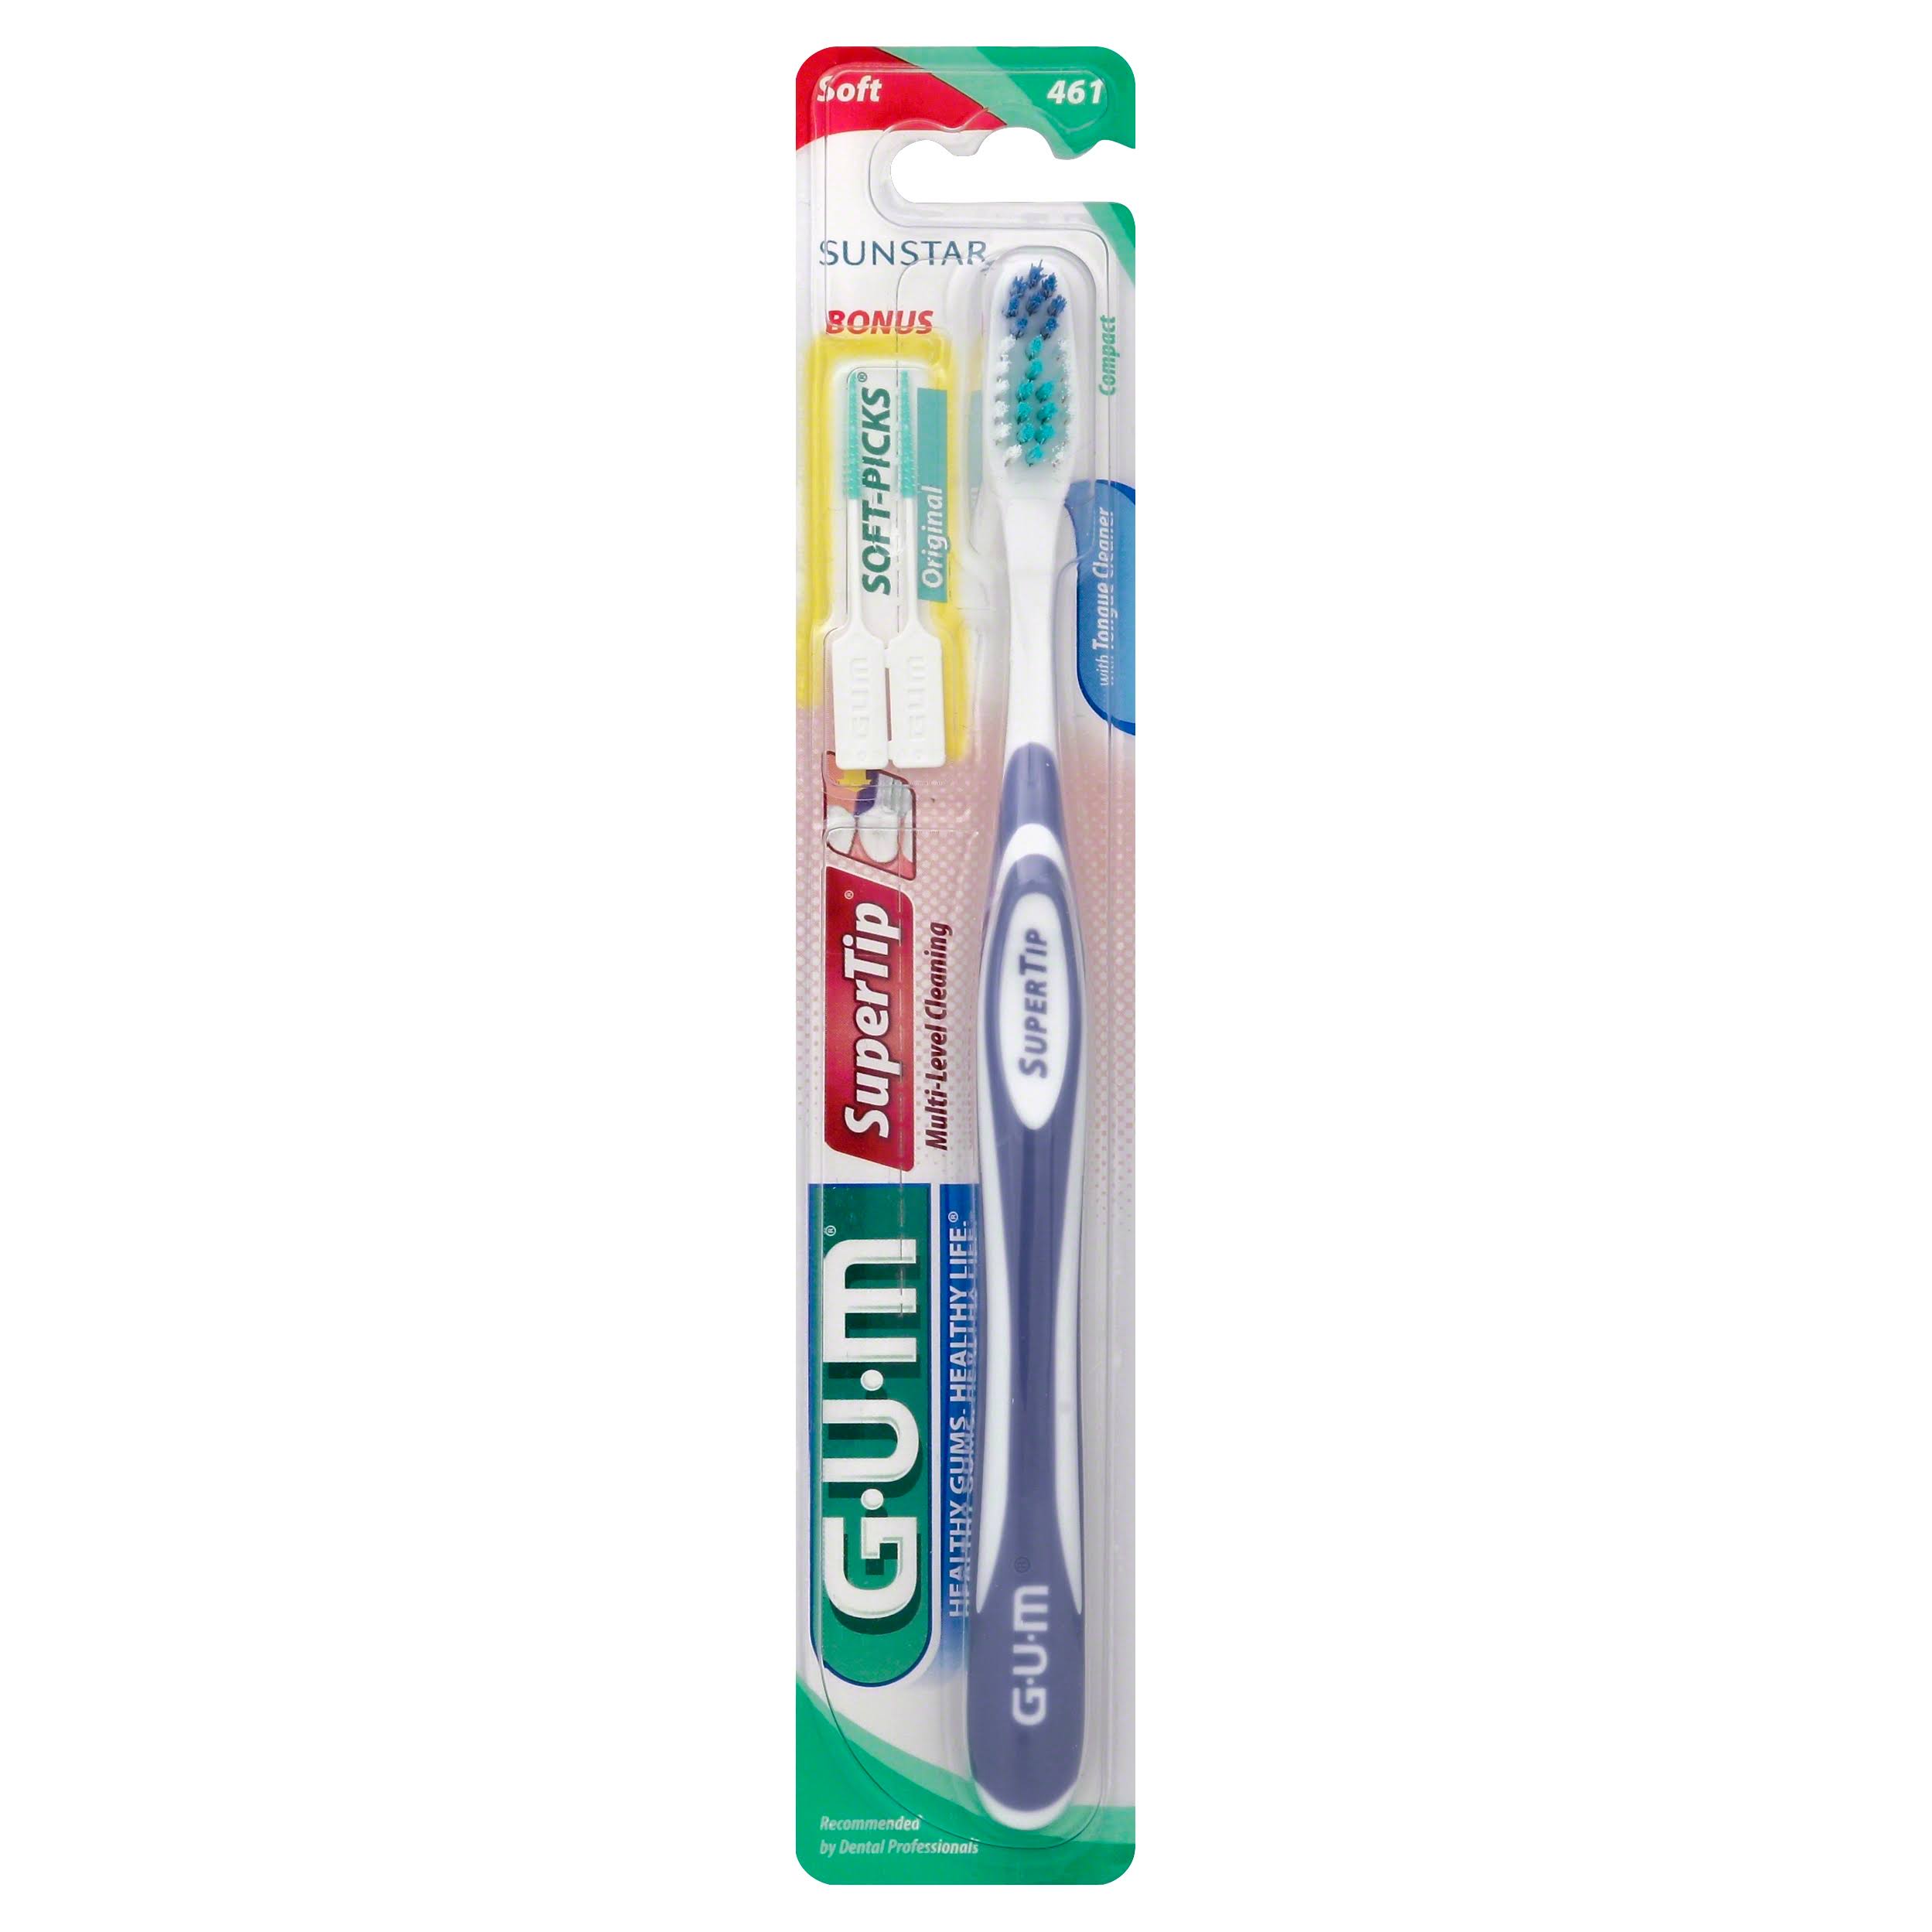 Gum Super Tip Soft Compact Toothbrush